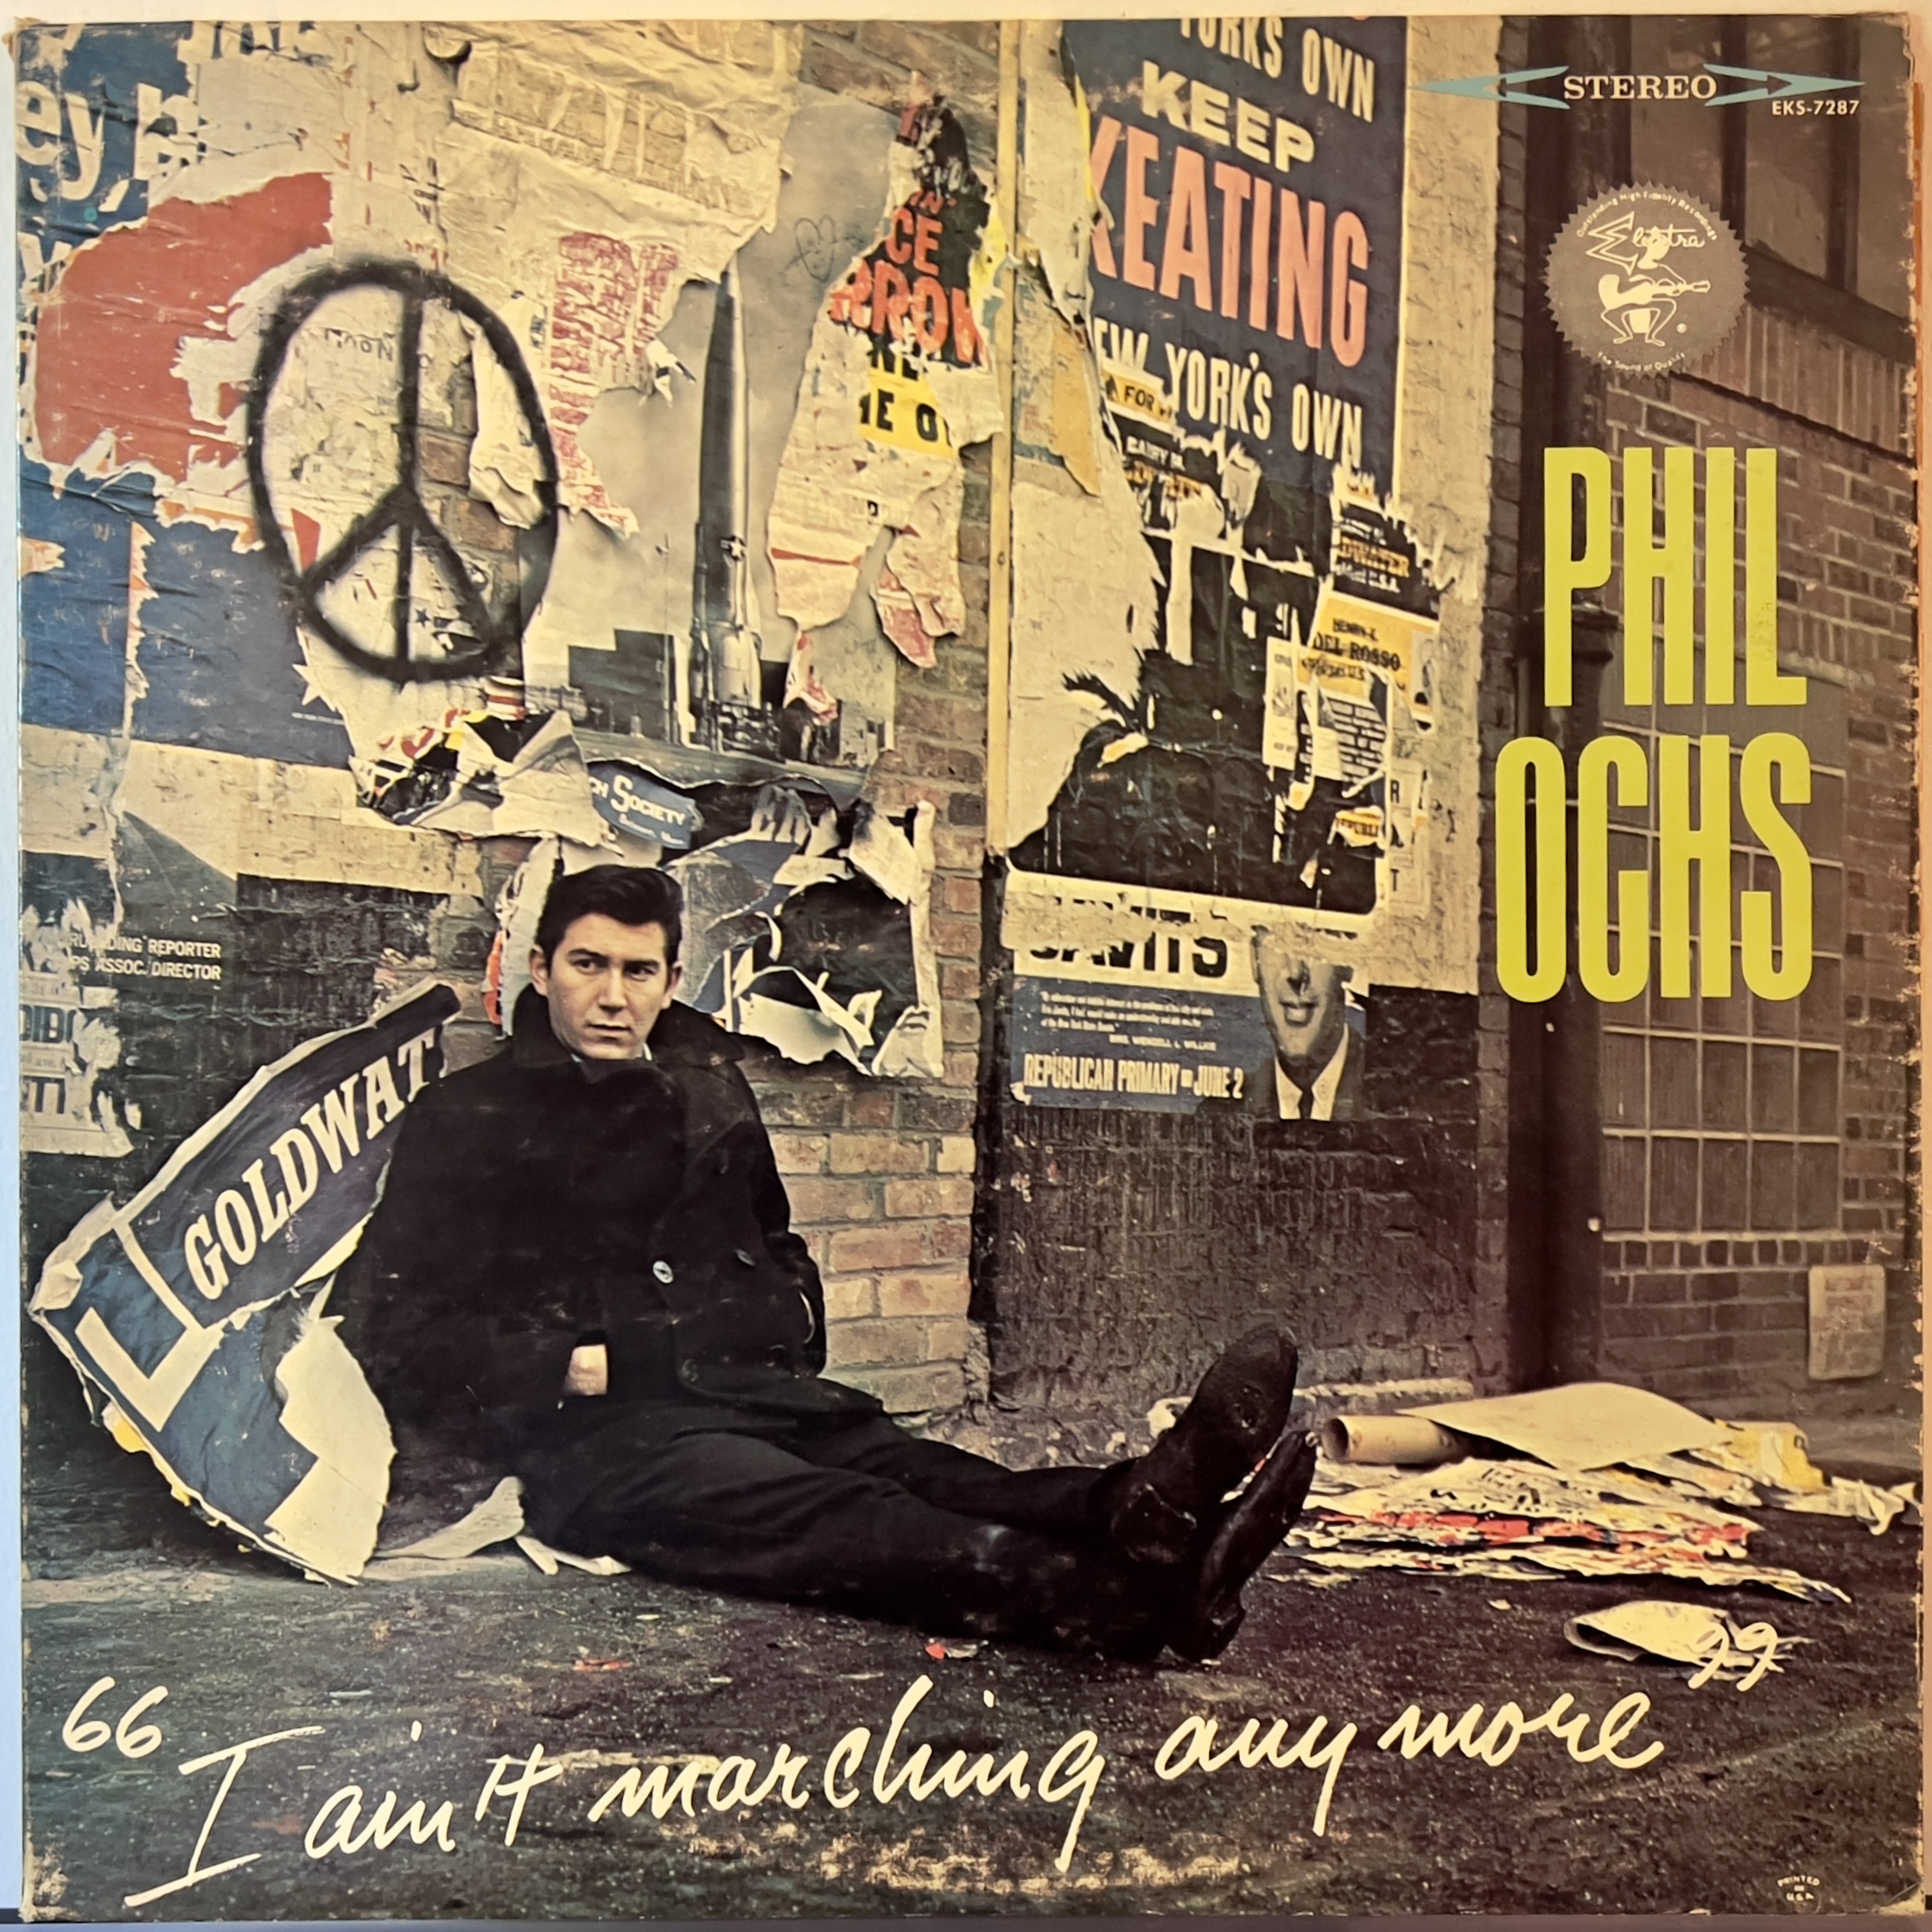 I Ain't Marching Any More by Phil Ochs